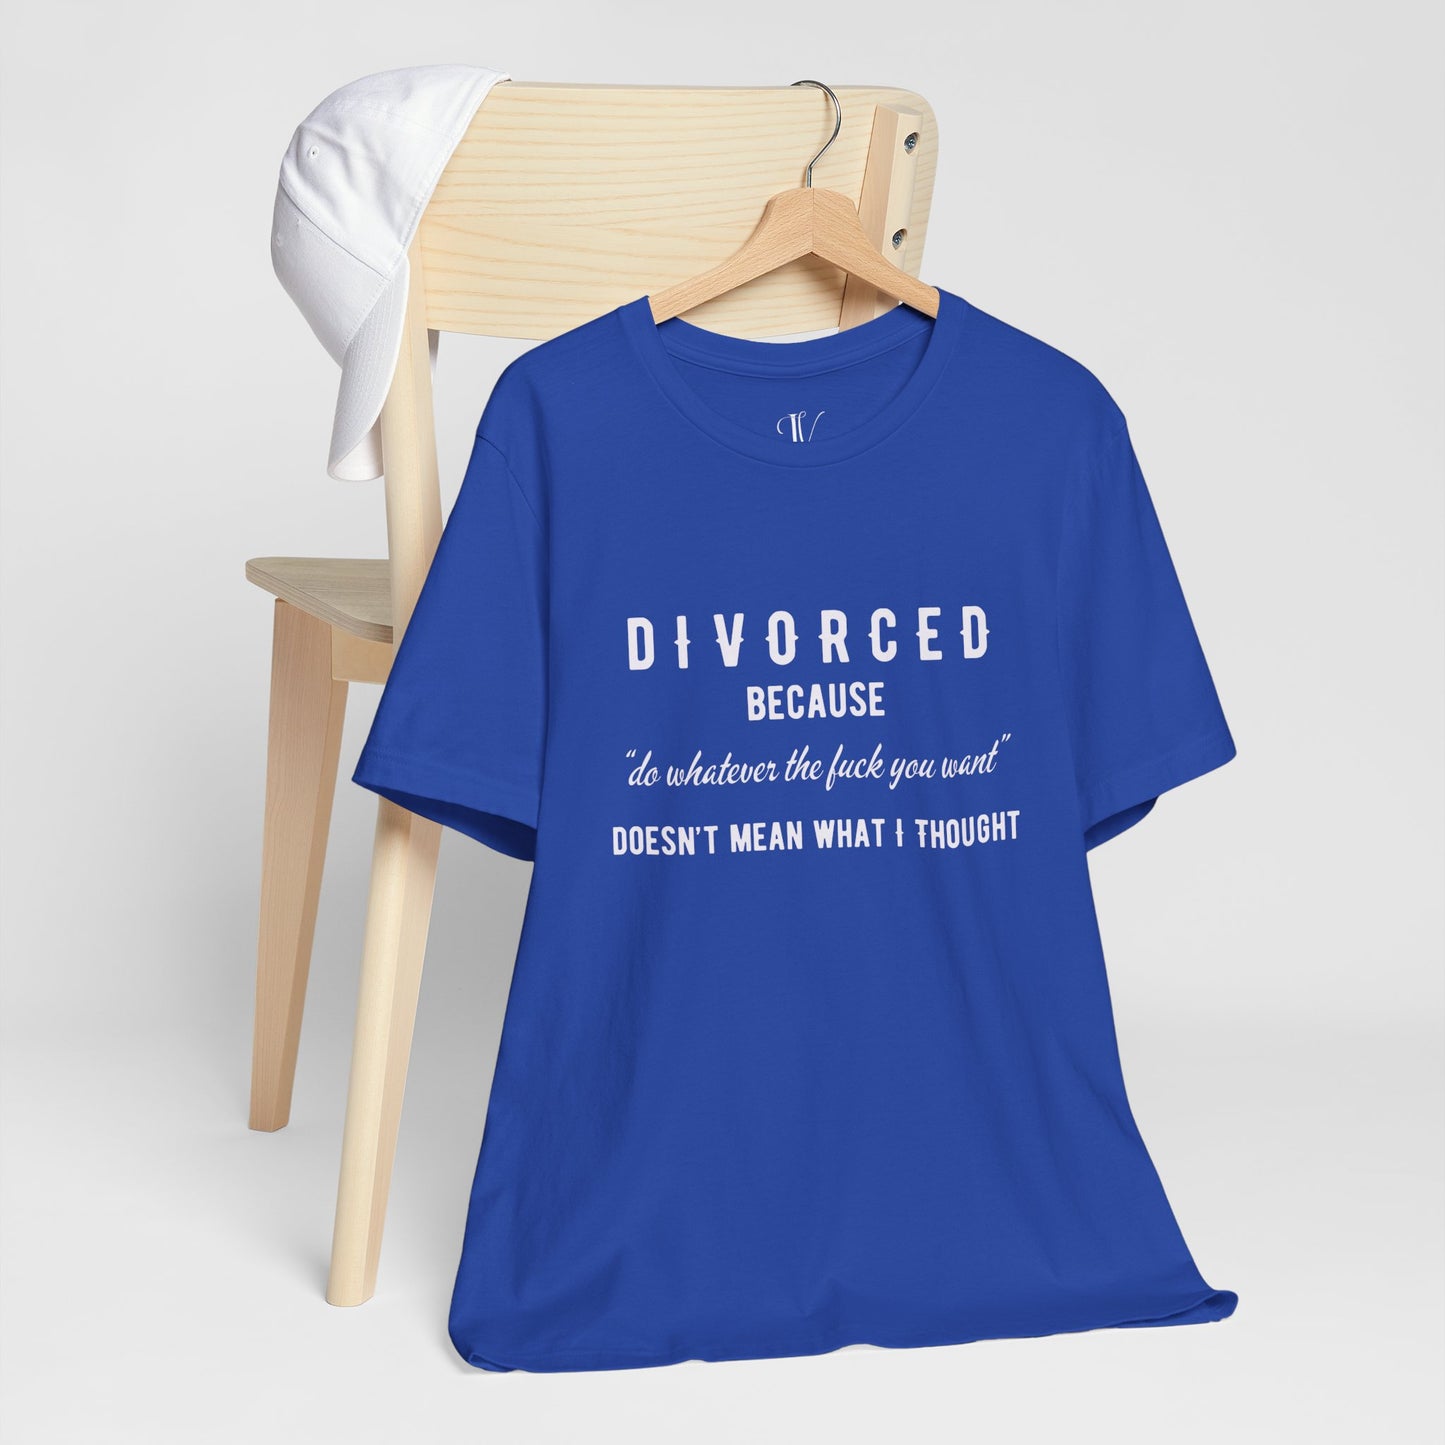 Divorced Shirt - Funny Divorce Party Gift for Ex-Husband or Ex-Wife T-Shirt True Royal XS 